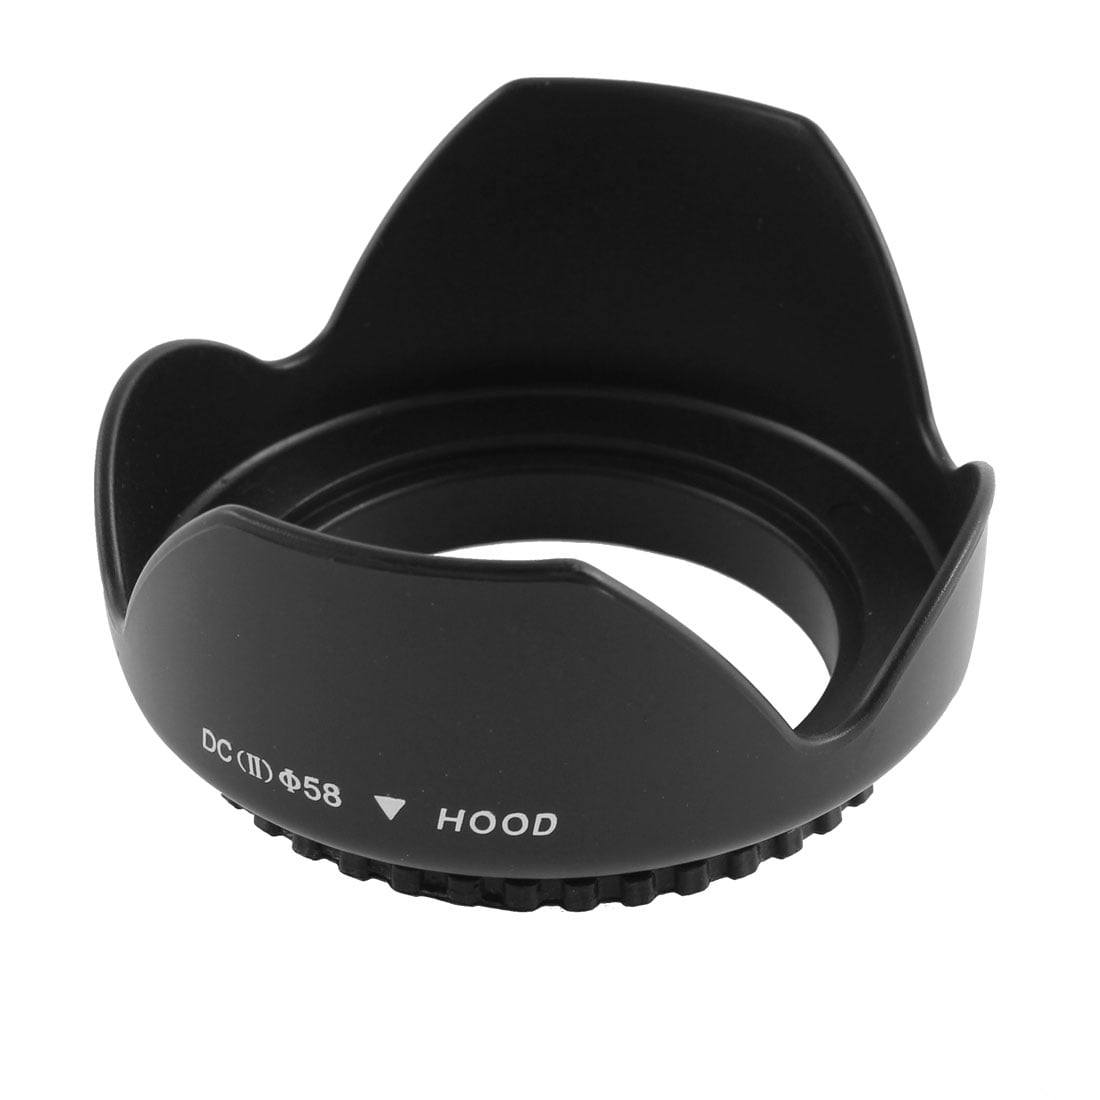 Durable Metal Vented Lens Hood for Lens with 58mm Filter Thread Black 